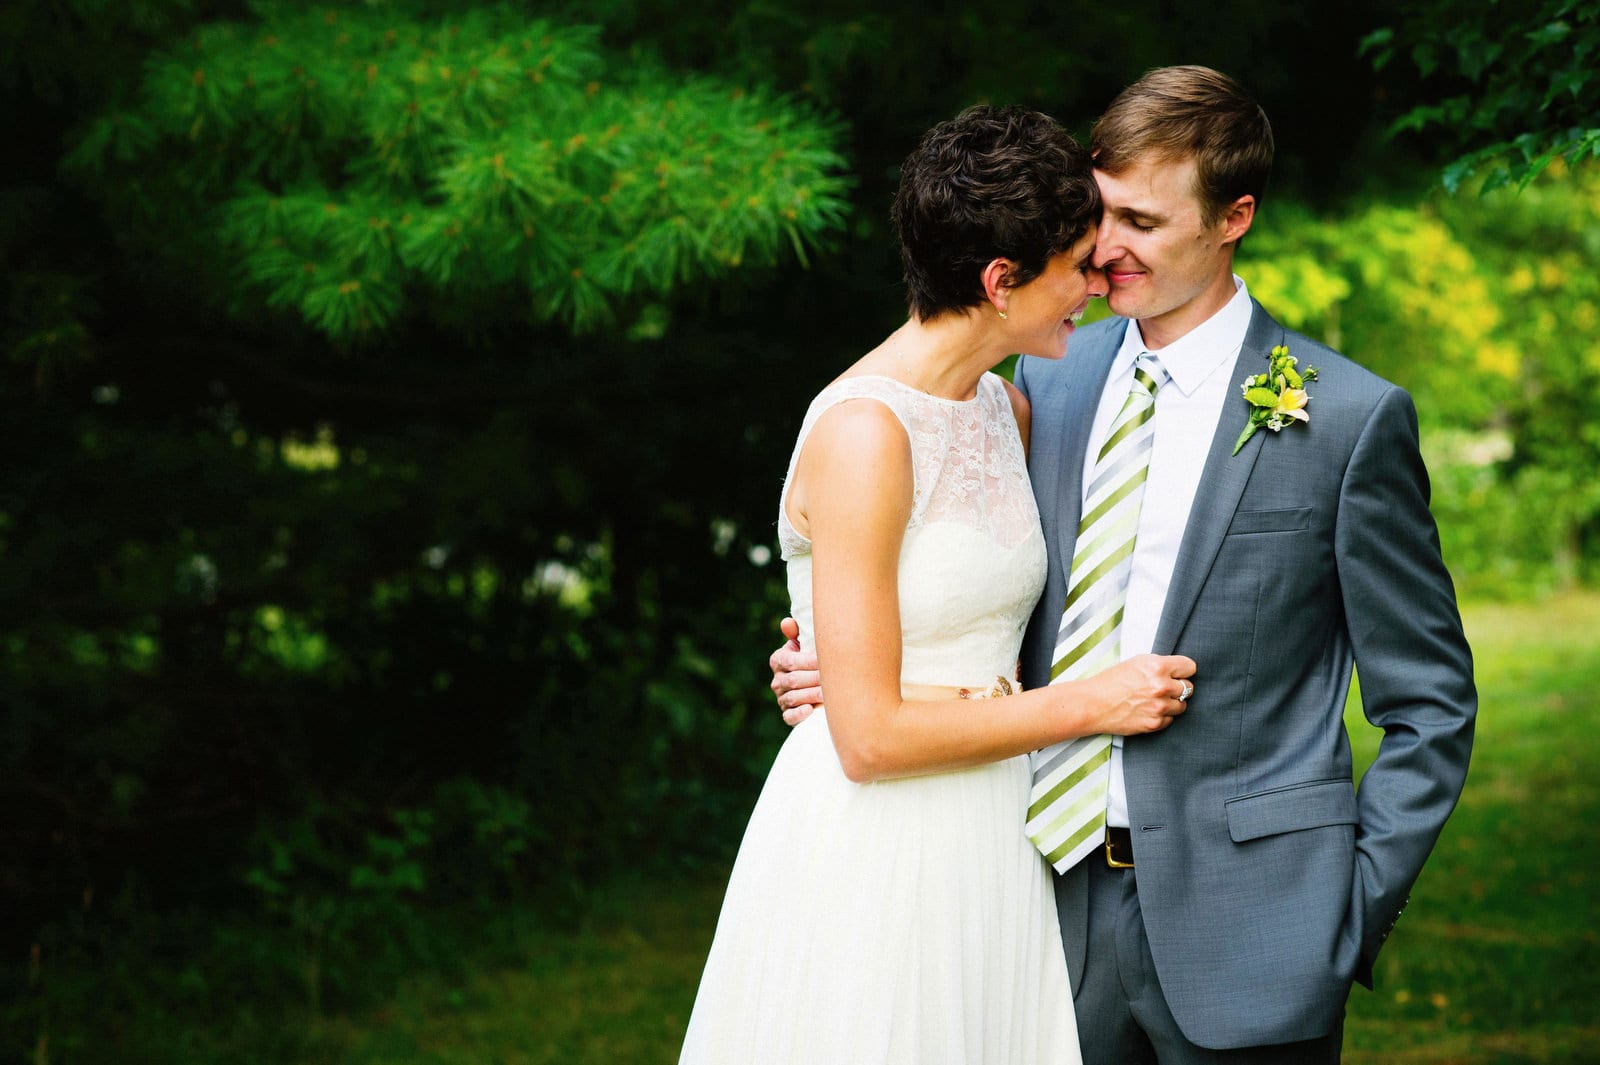 A bride and groom smile and embrace on a forest path after their wedding at the Succop Conservancy./